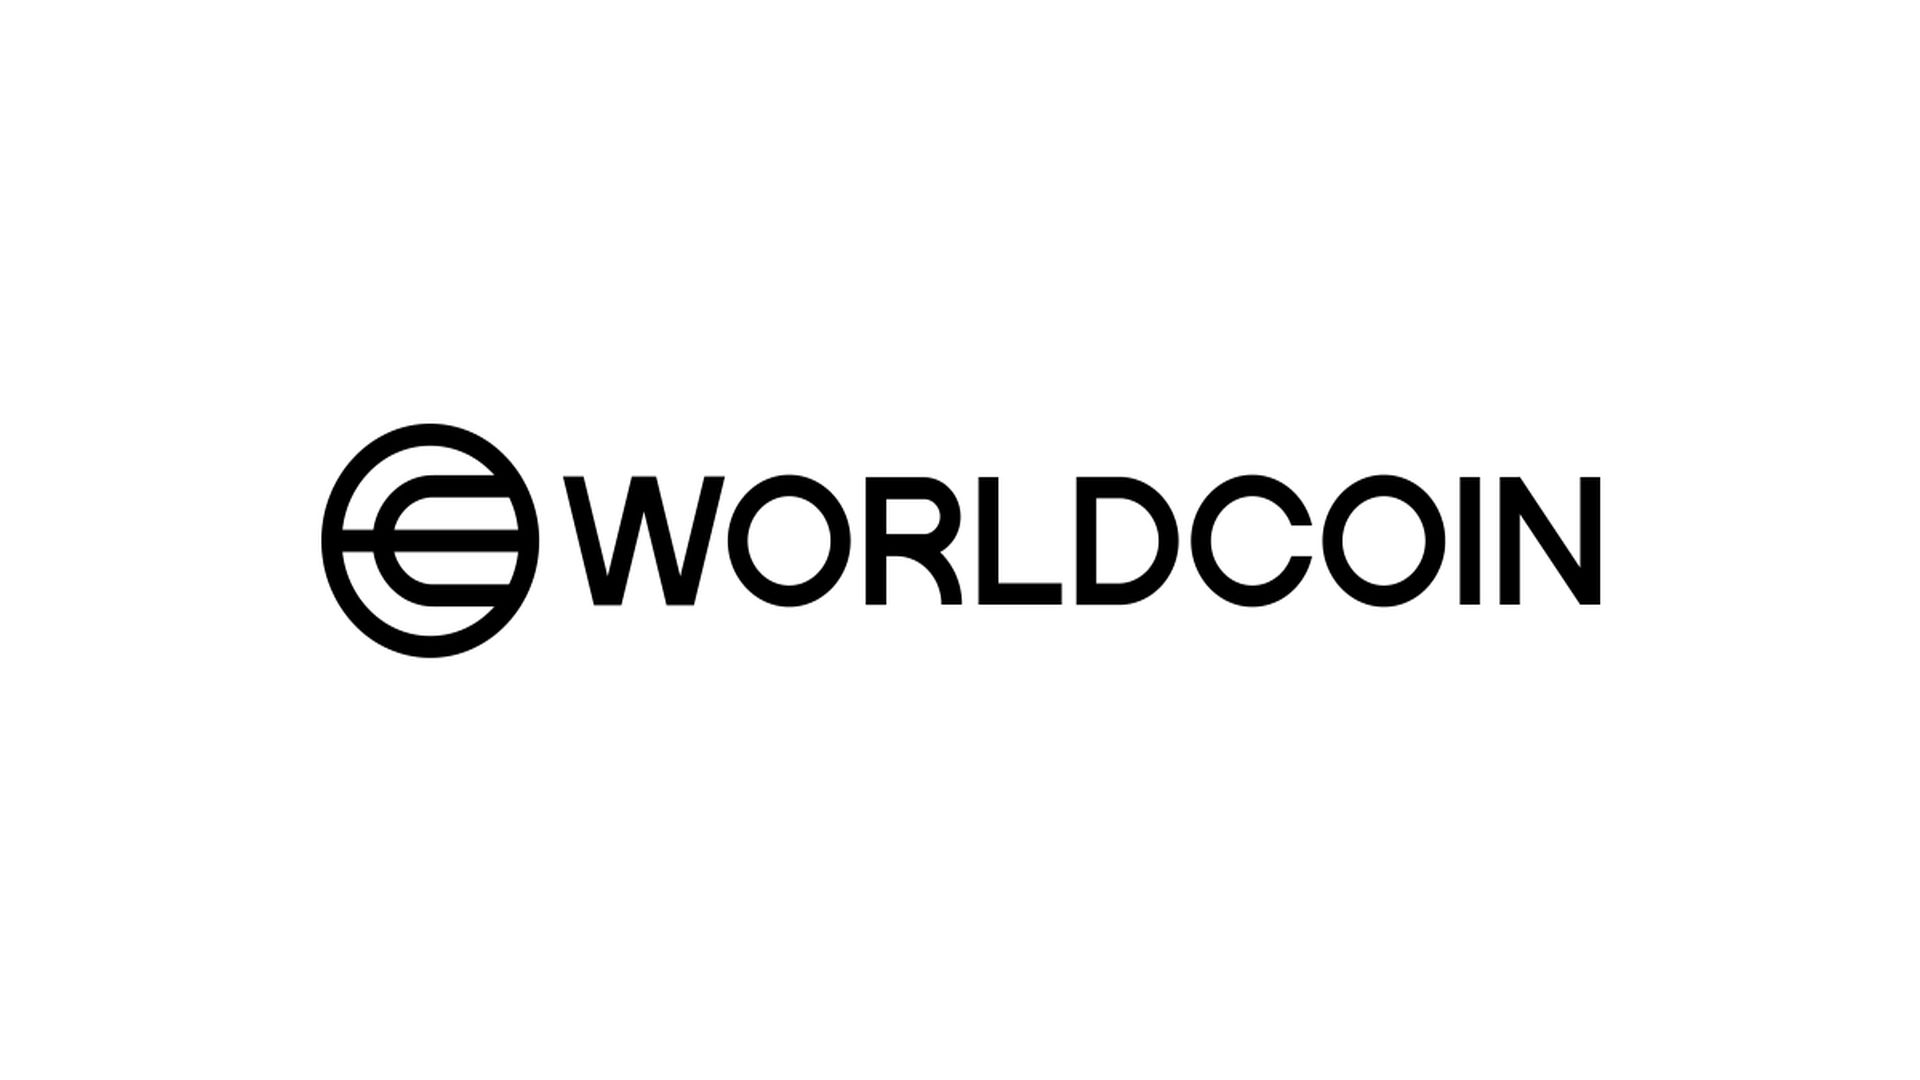 emplacements des orbes worldcoin